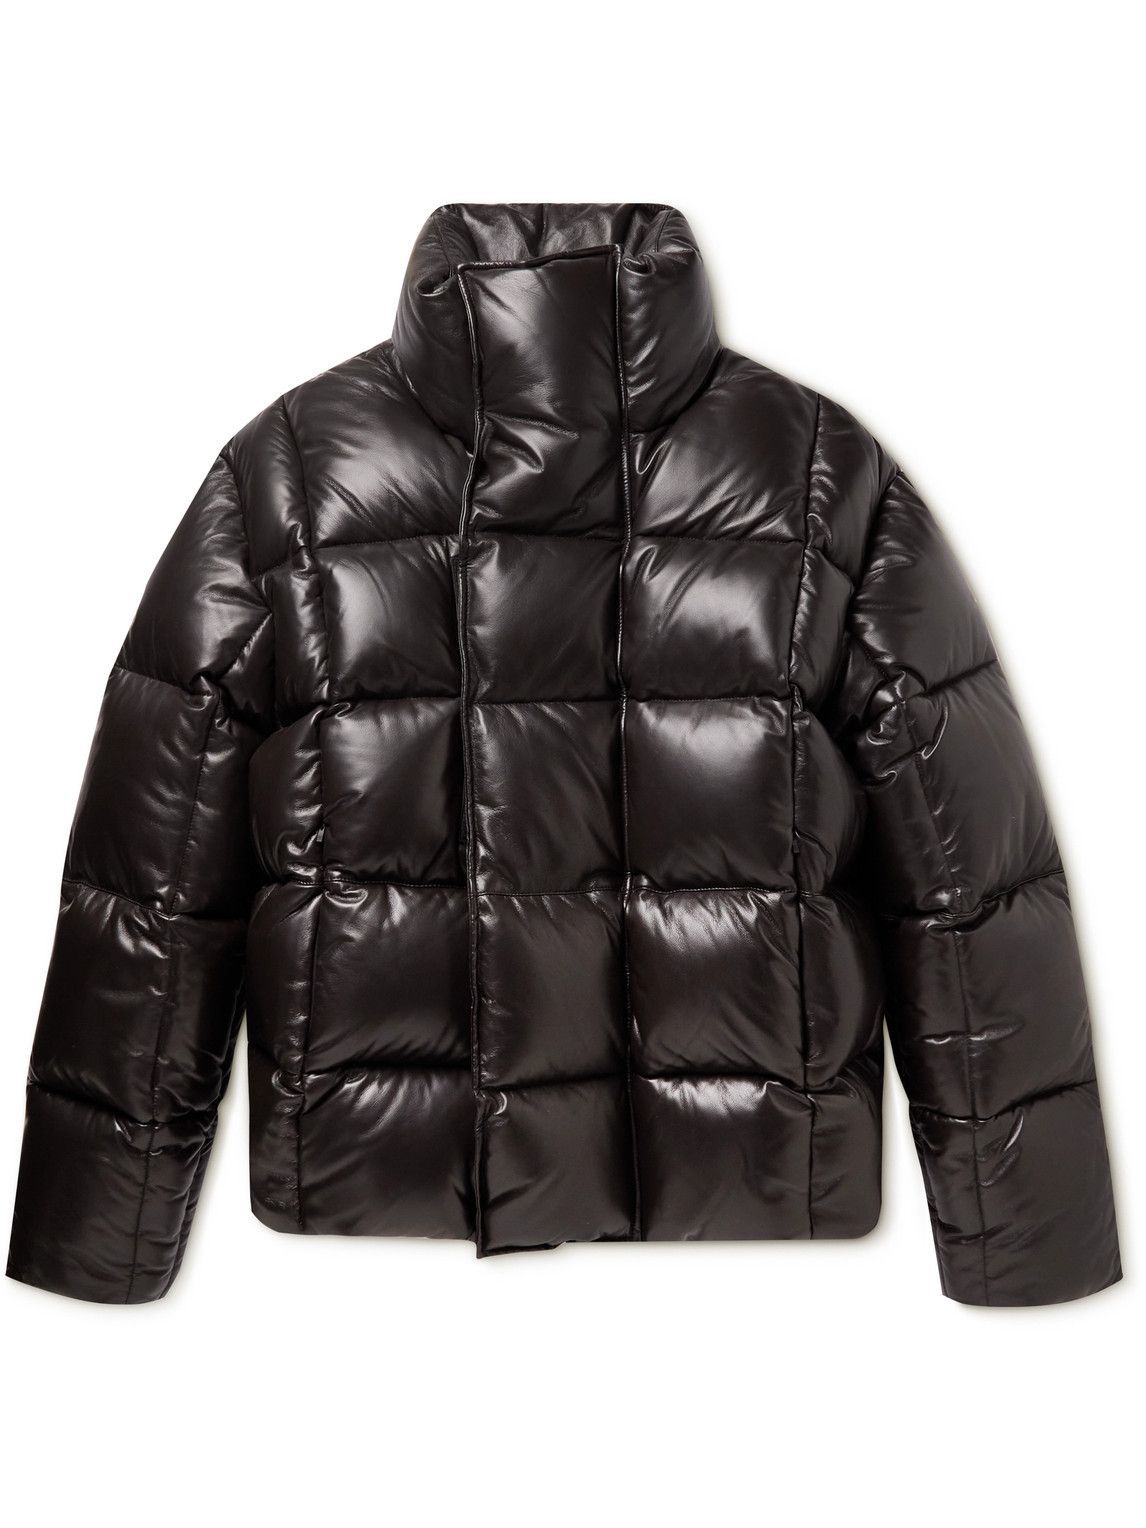 Givenchy - Oversized Quilted Leather Down Jacket - Brown Givenchy